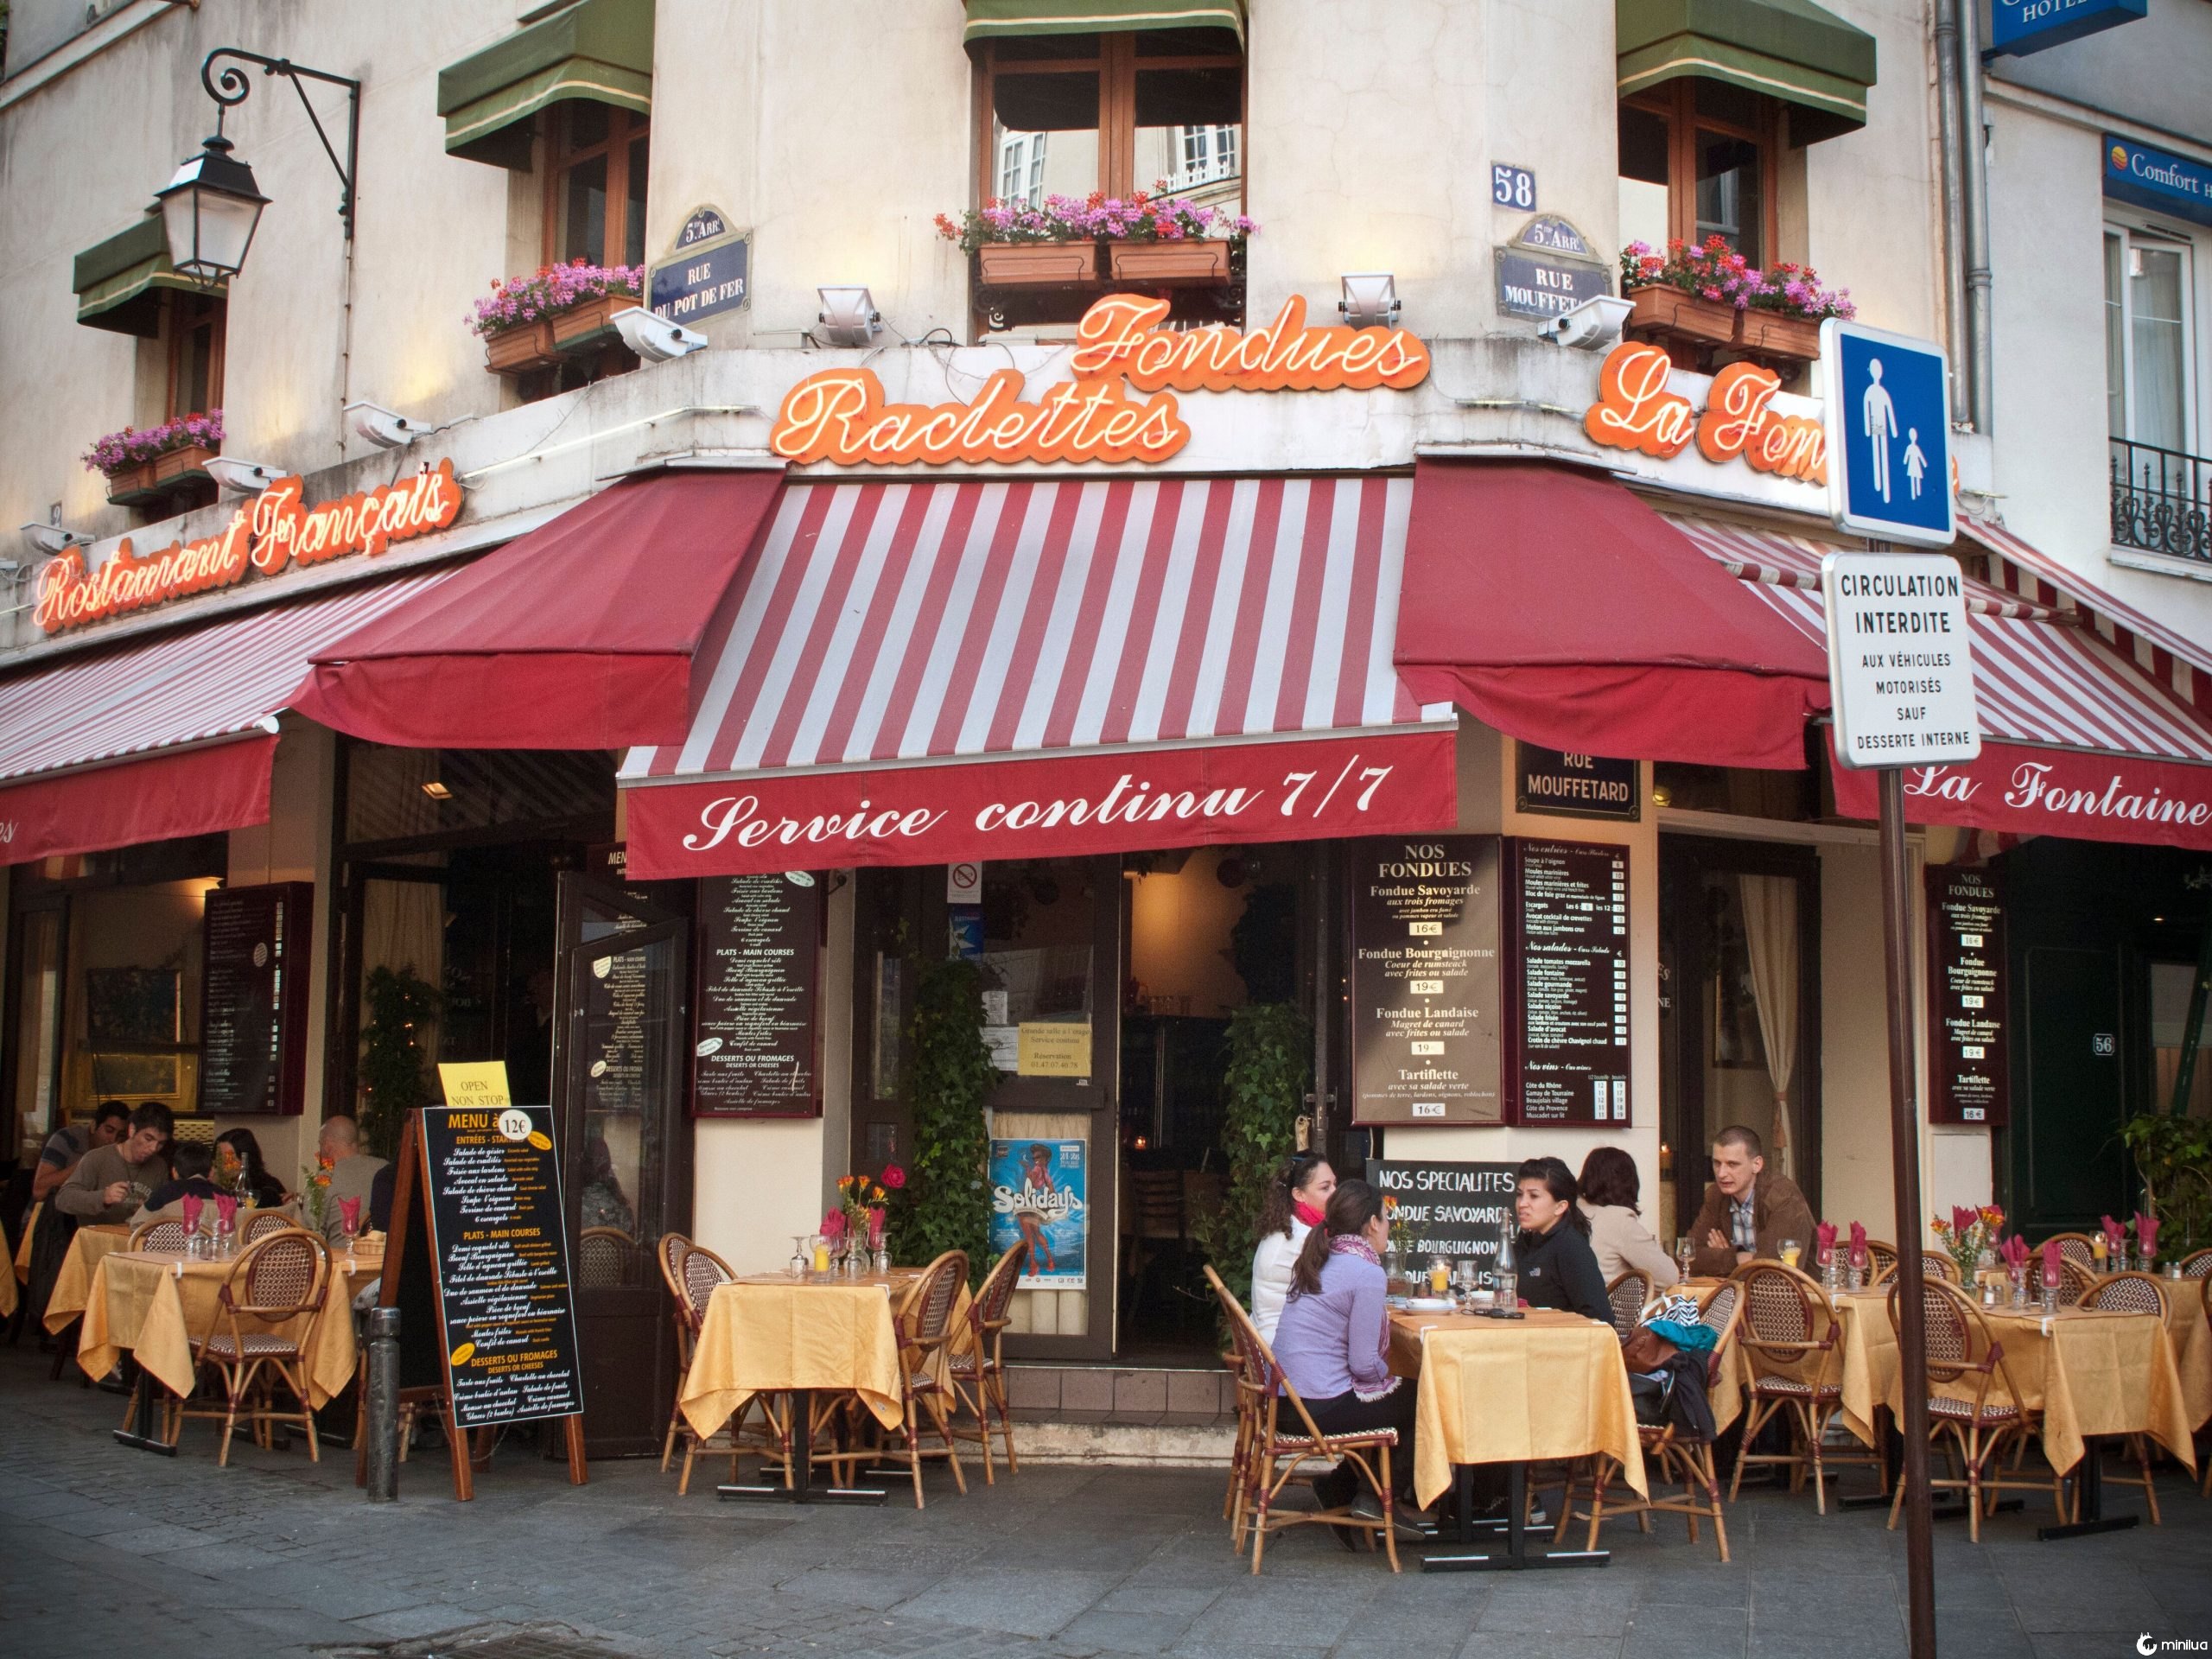 Locals recommend planning leisure time to walk around the charming streets of Paris.&nbsp;